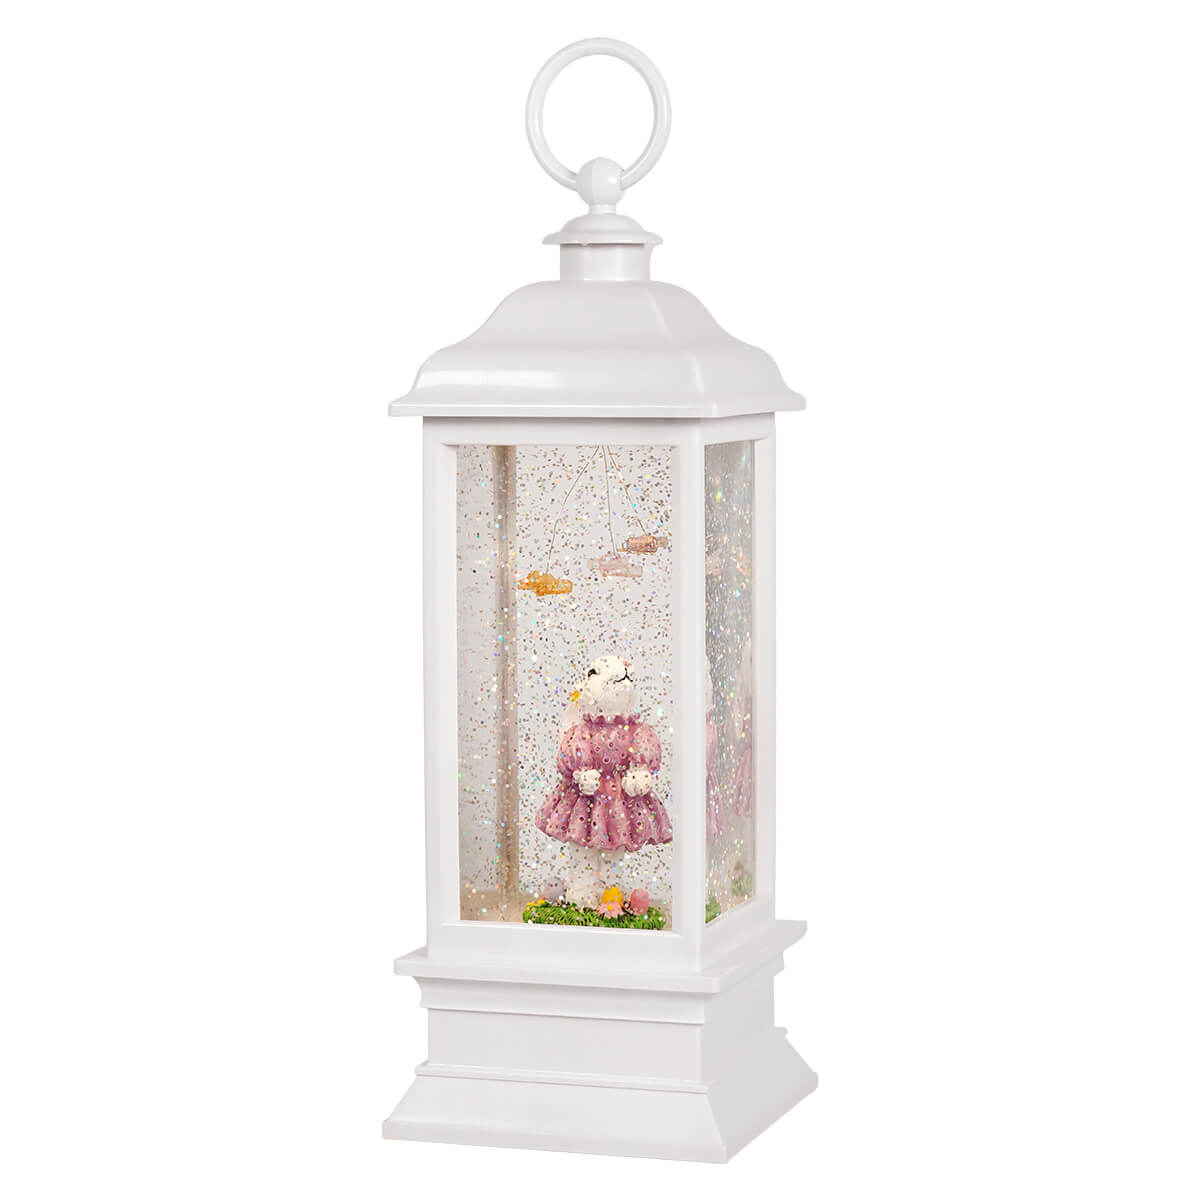 Bunny With Butterflies Animated Lighted Water Lantern